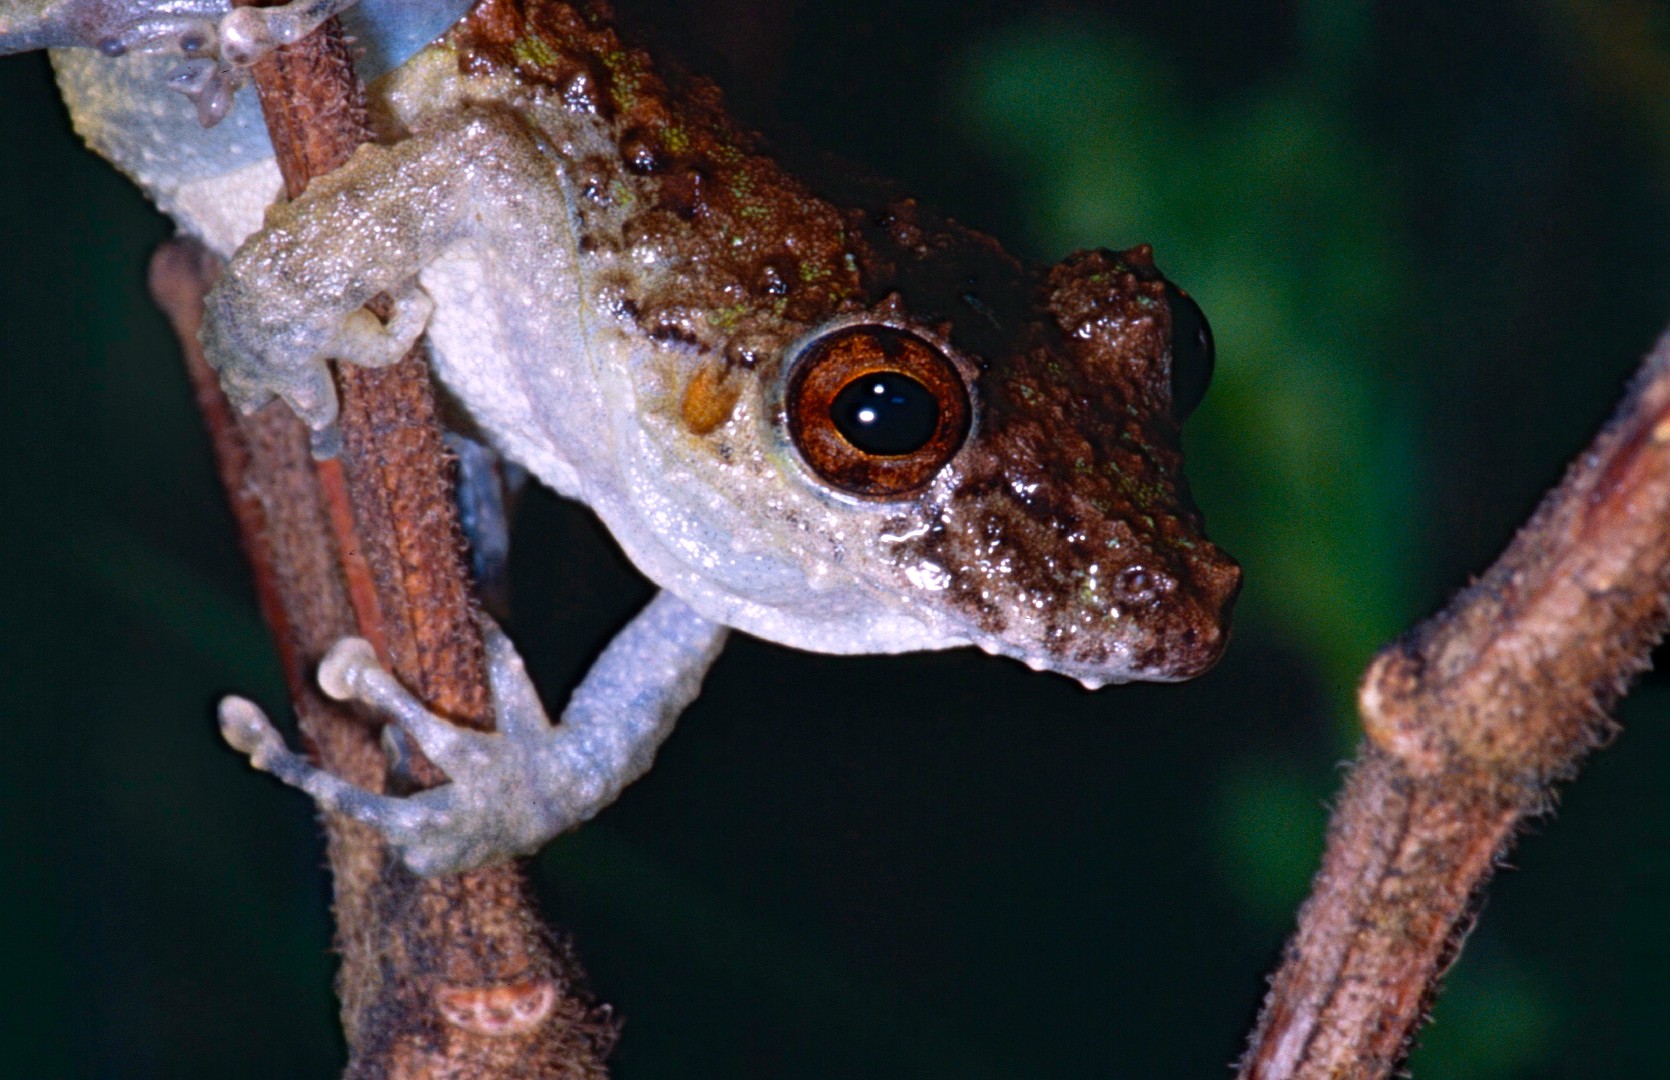 Snouted treefrogs (Scinax)